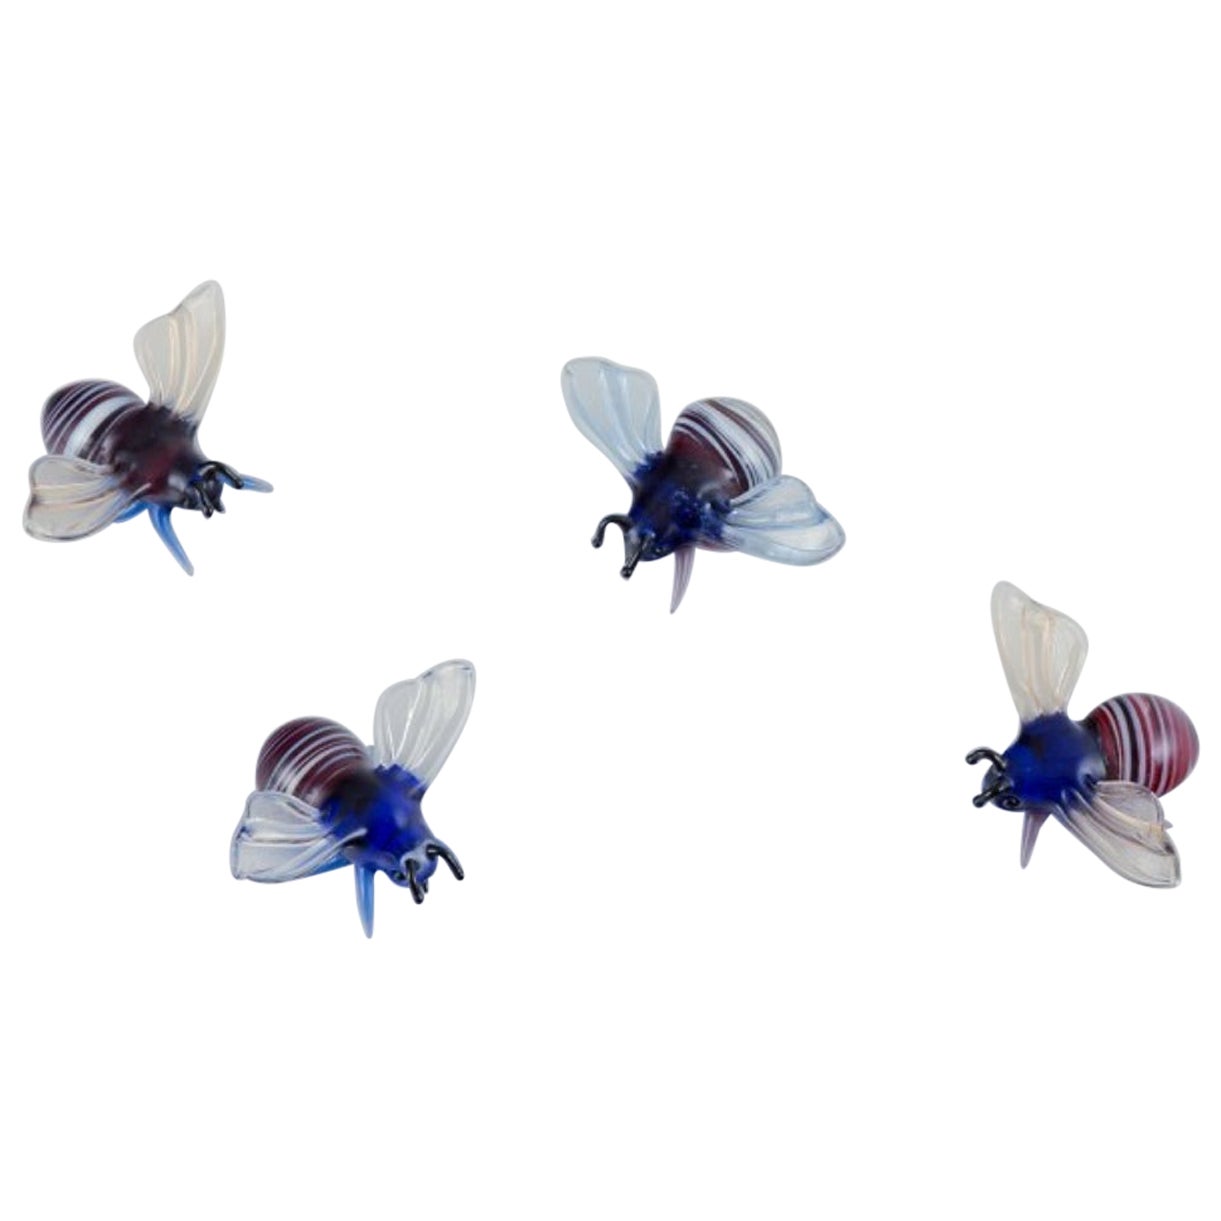 Murano, Italy. A collection of four miniature glass figurines of bees. For Sale